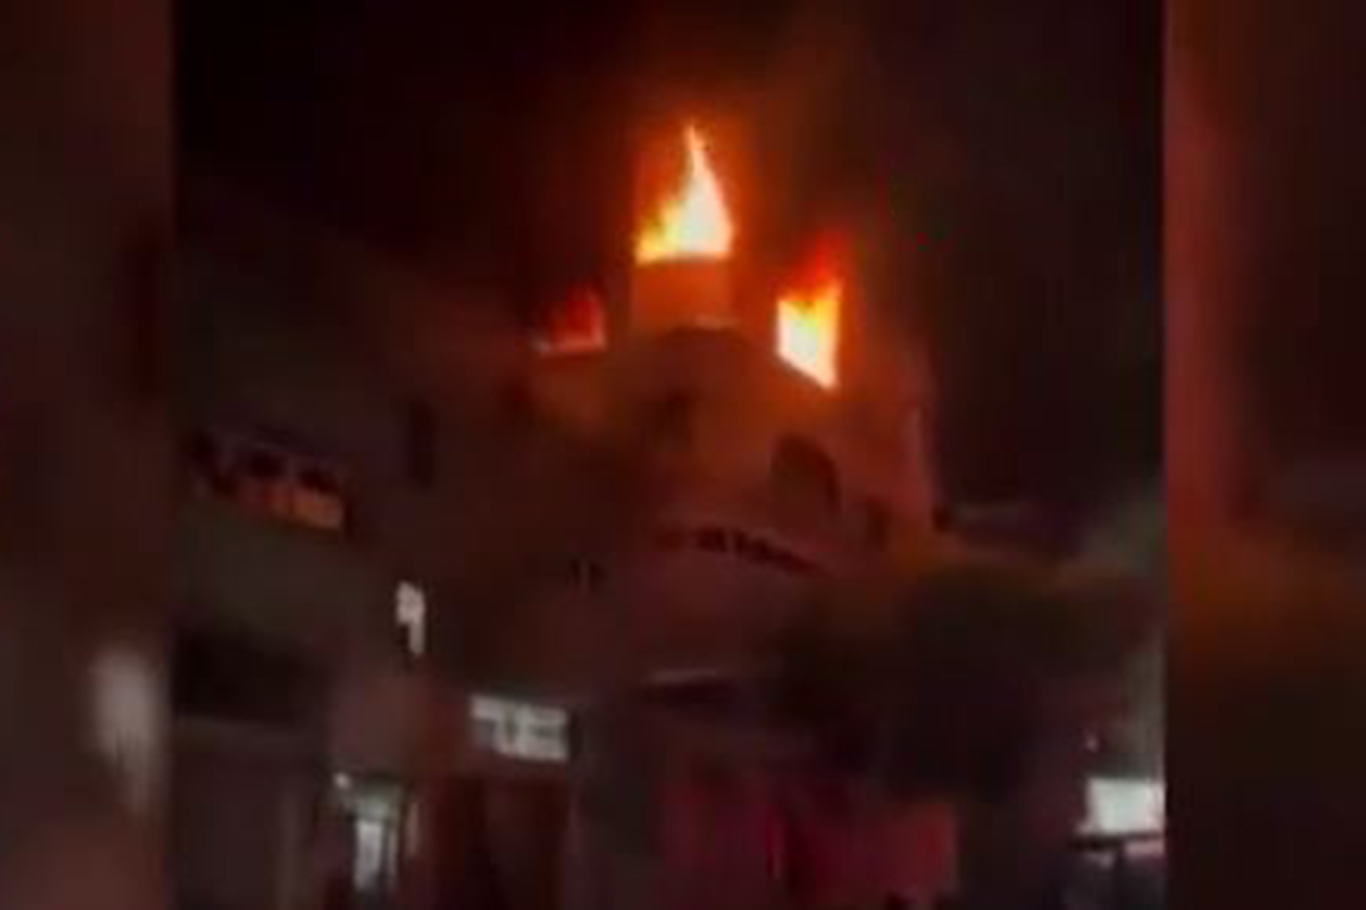 House fire in Gaza Strip killed at least 21